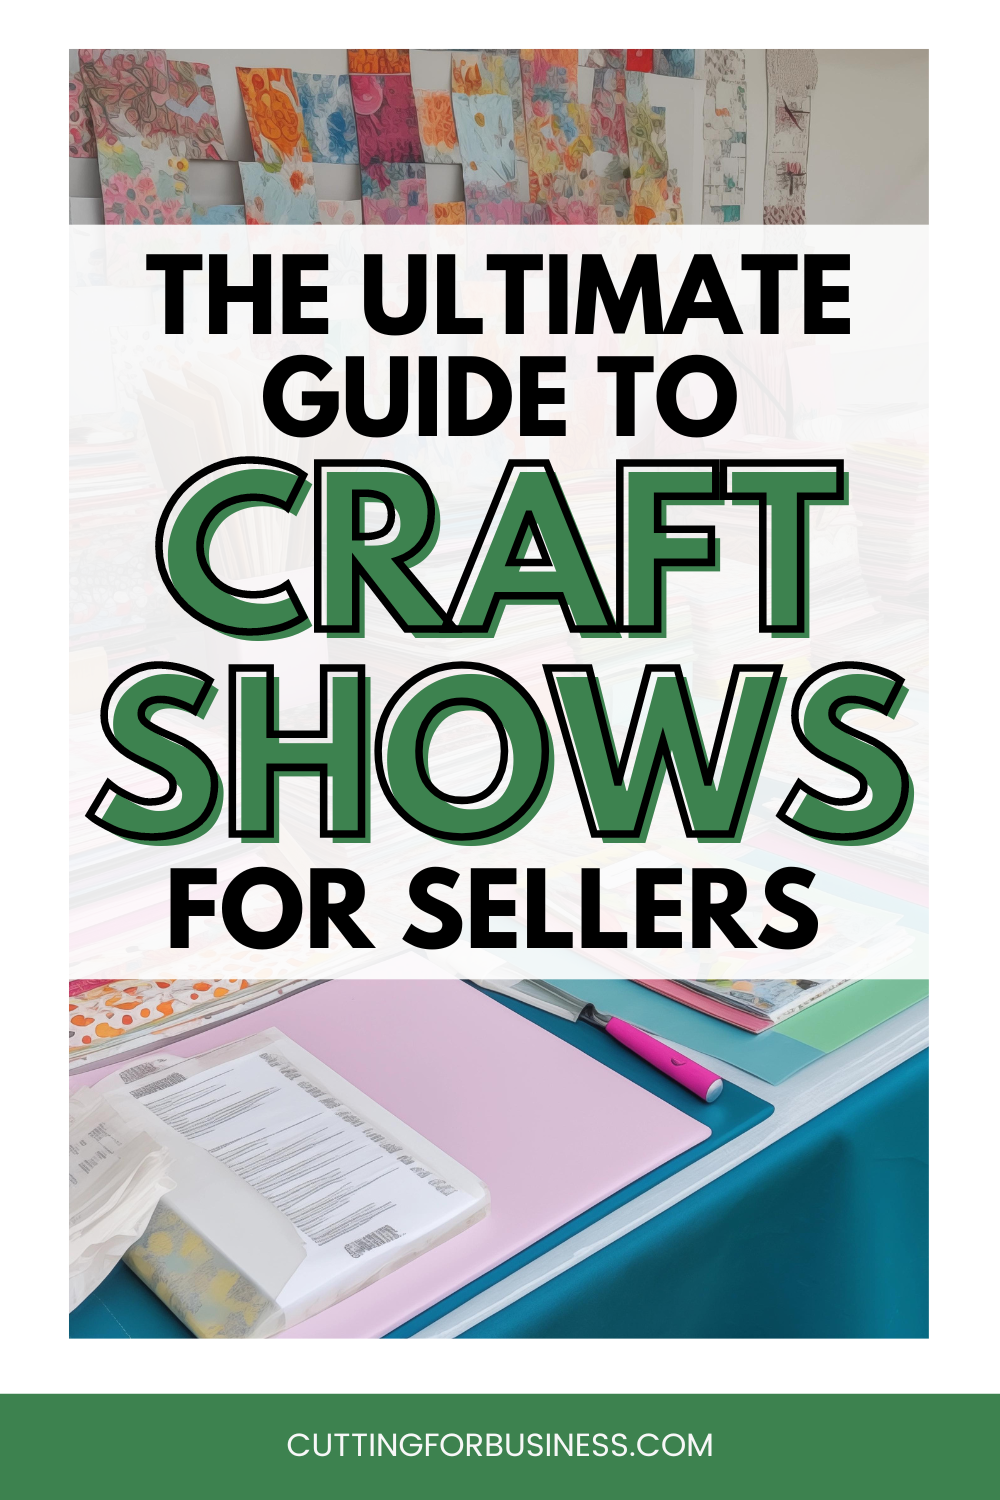 The Ultimate Guide to Craft Shows for Sellers - cuttingforbusiness.com